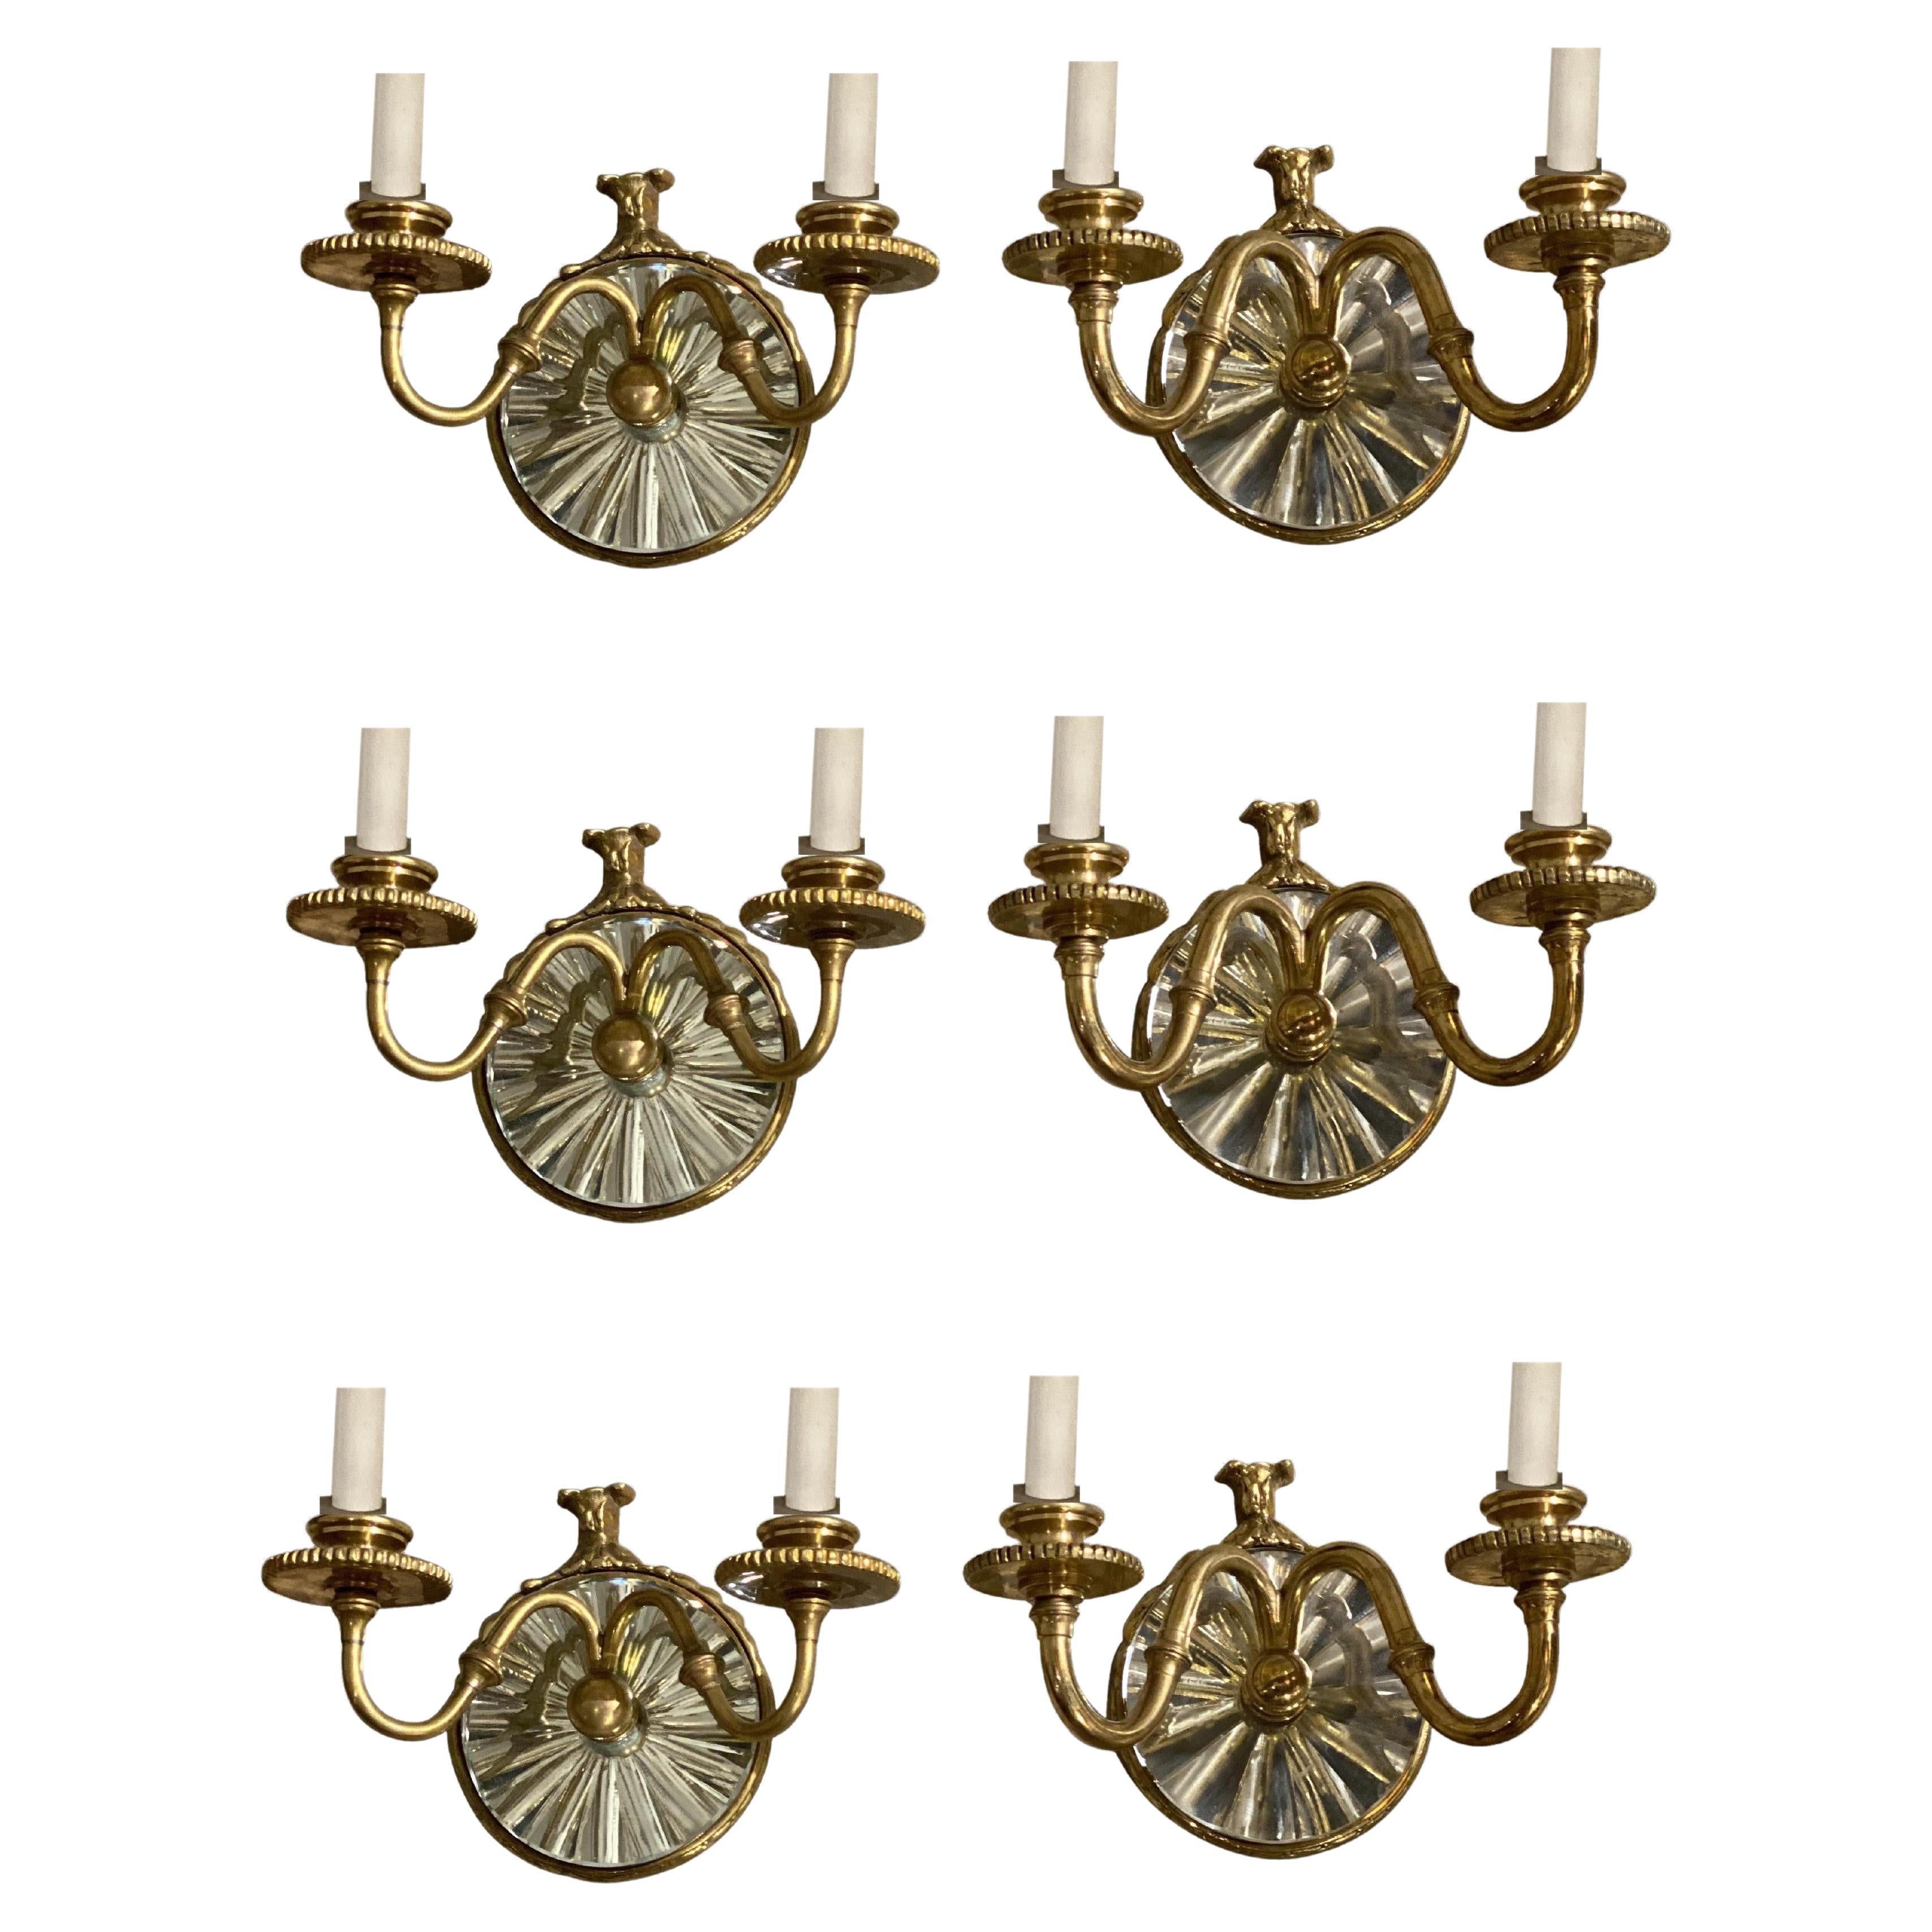 1920er Caldwell Small Mirror Sconces mit 2 Lights